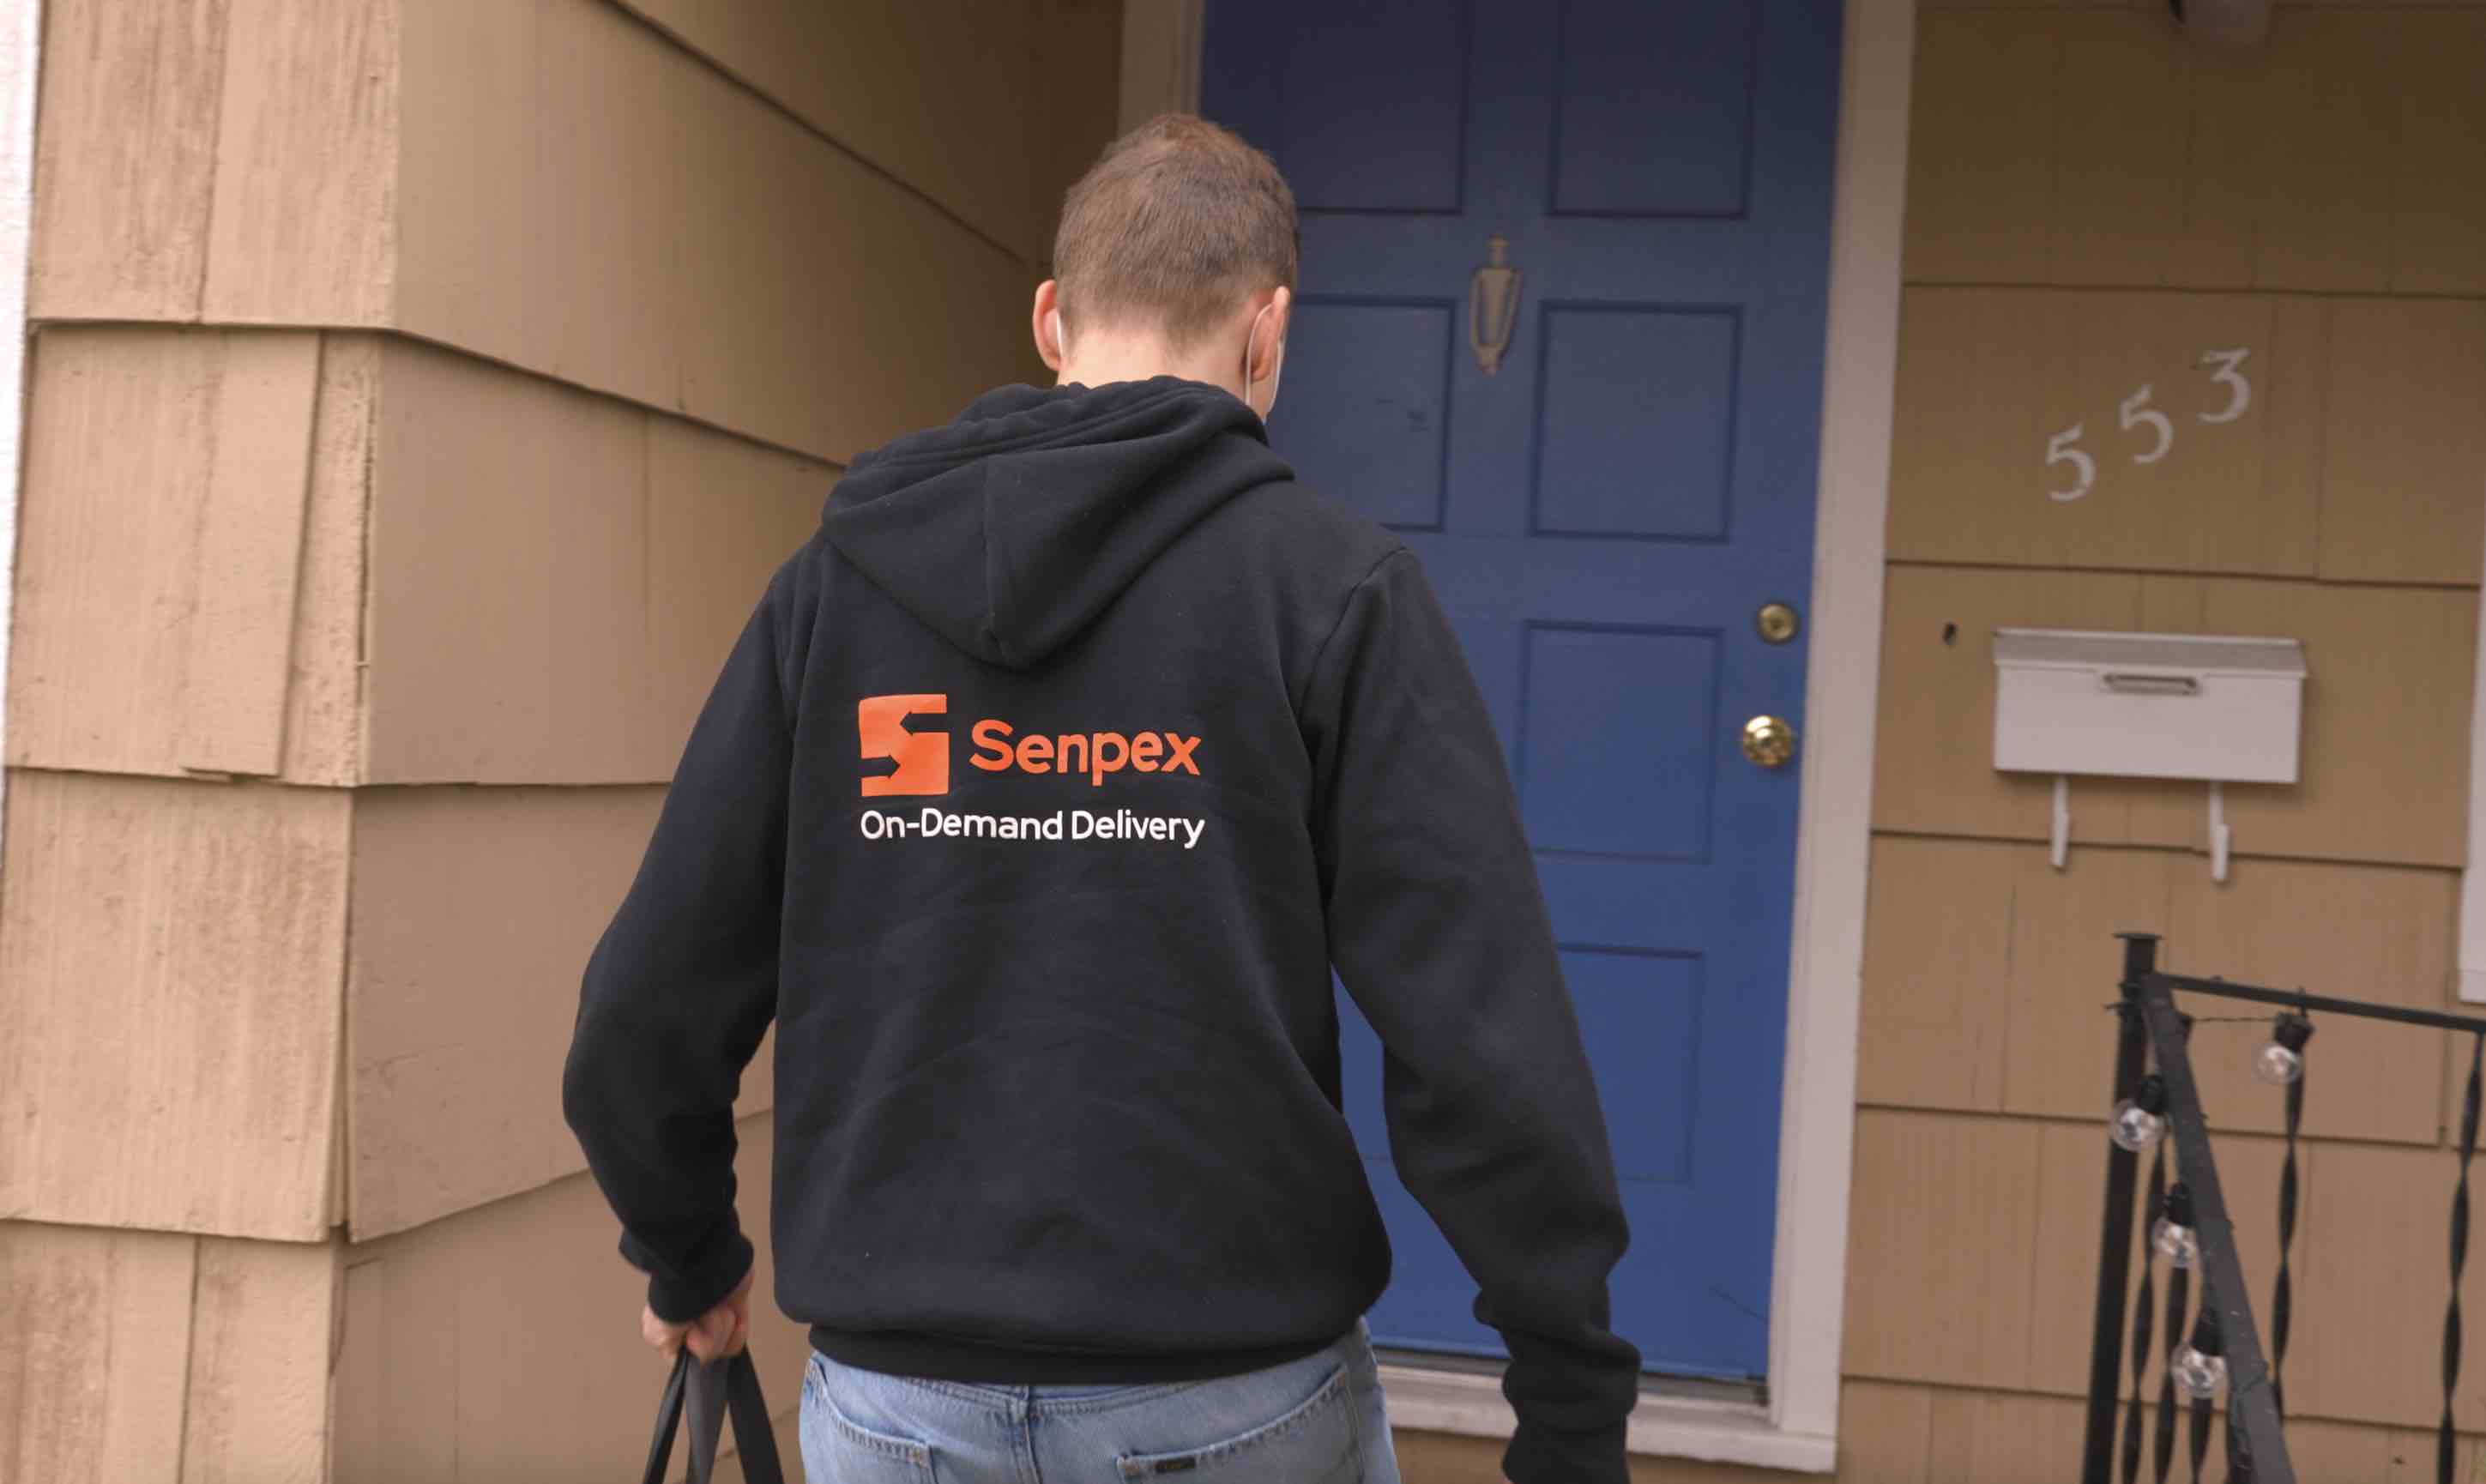 Senpex Technology launches logistics feature "Senpex Flex" allowing organizations to partner with dedicated drivers